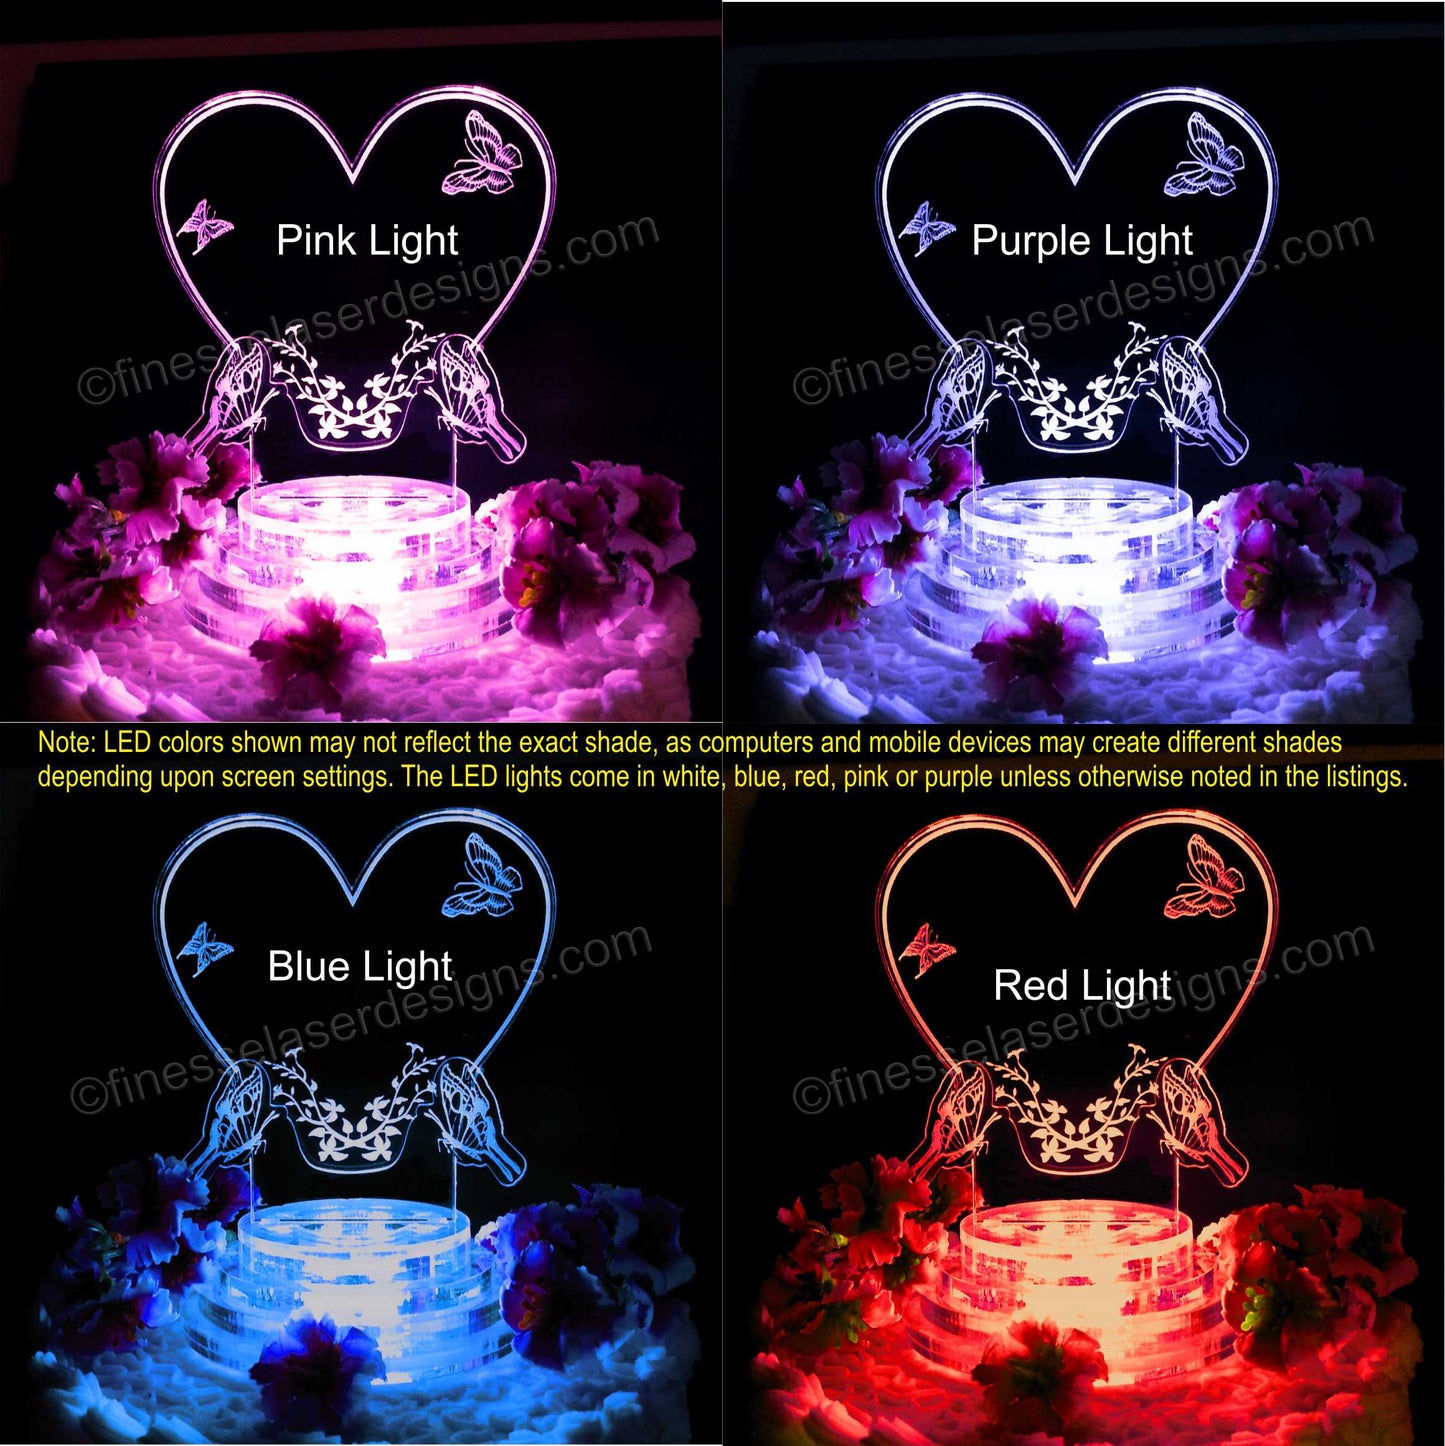 Colored views of acrylic butterfly heart cake topper showing pink, purple, blue and red lighted views